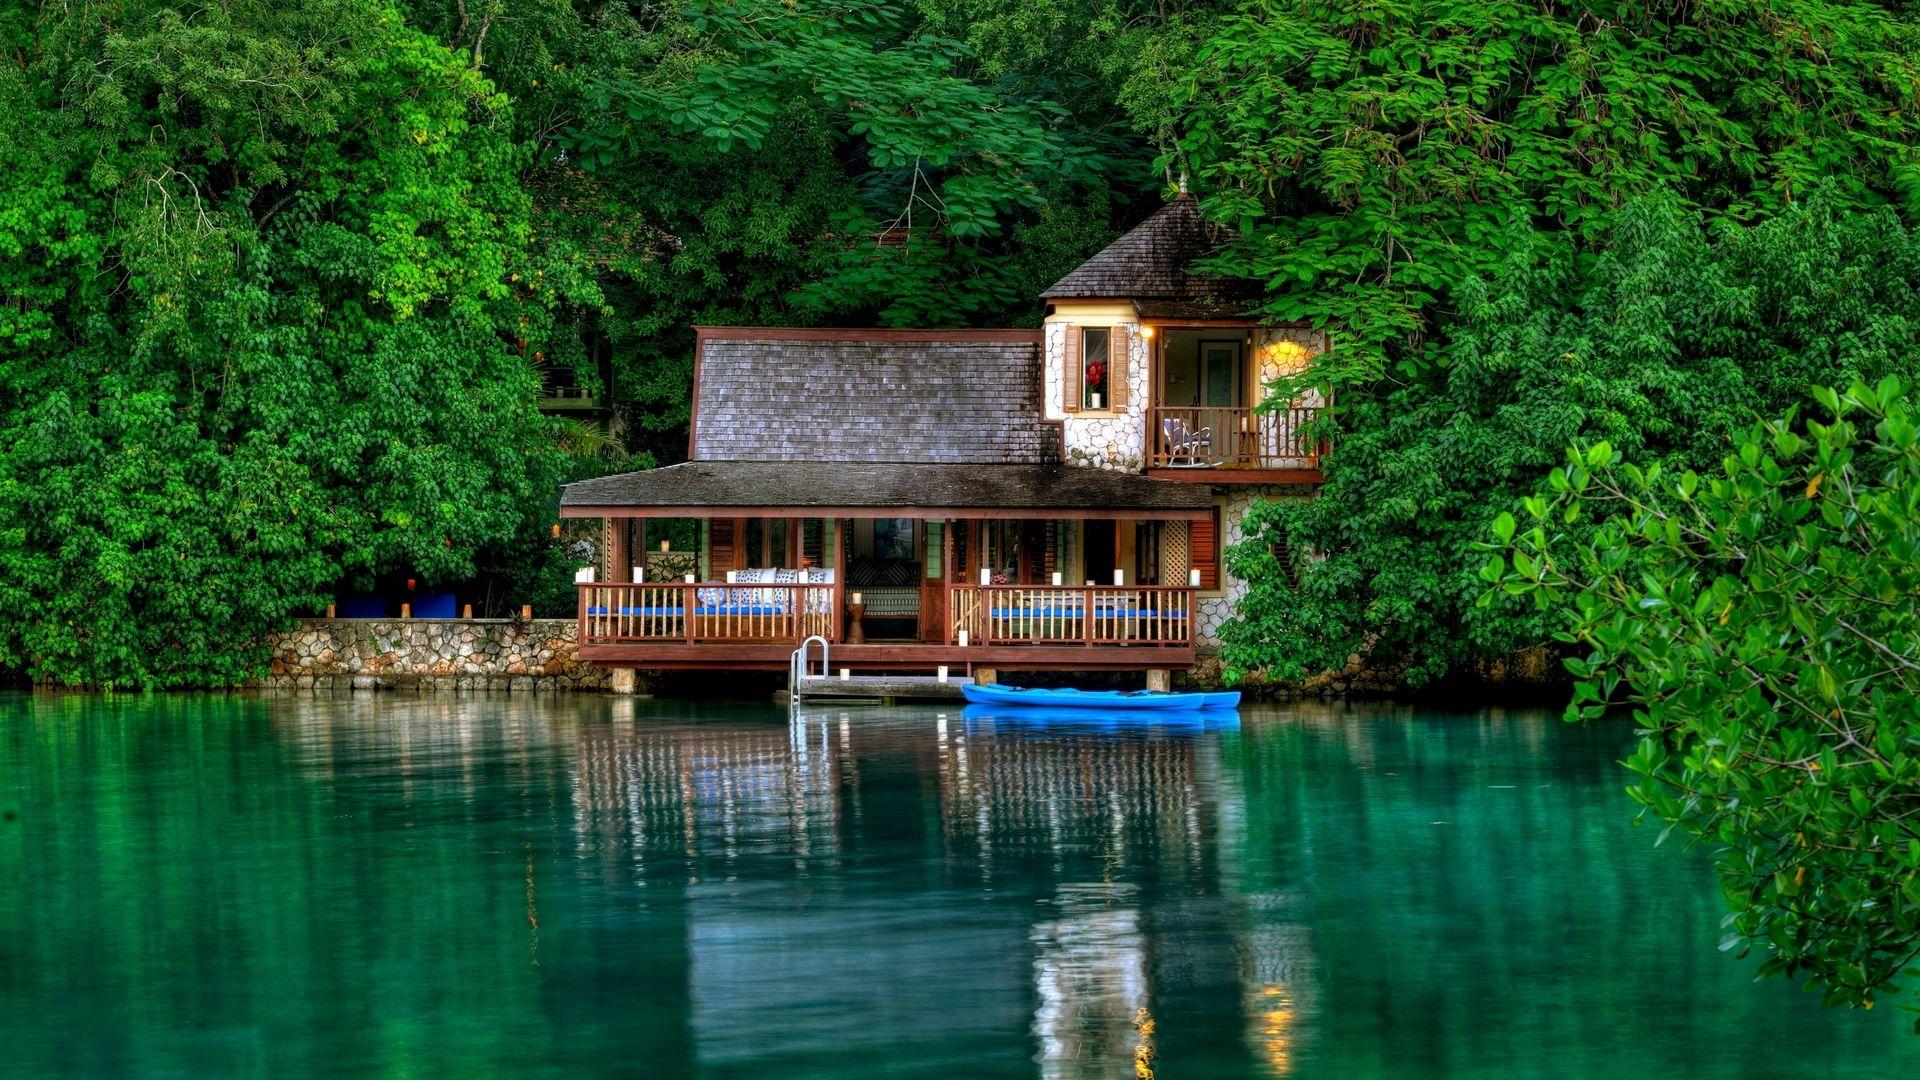 Download wallpaper 1920x1080 house, hut, boat, thickets, jungle